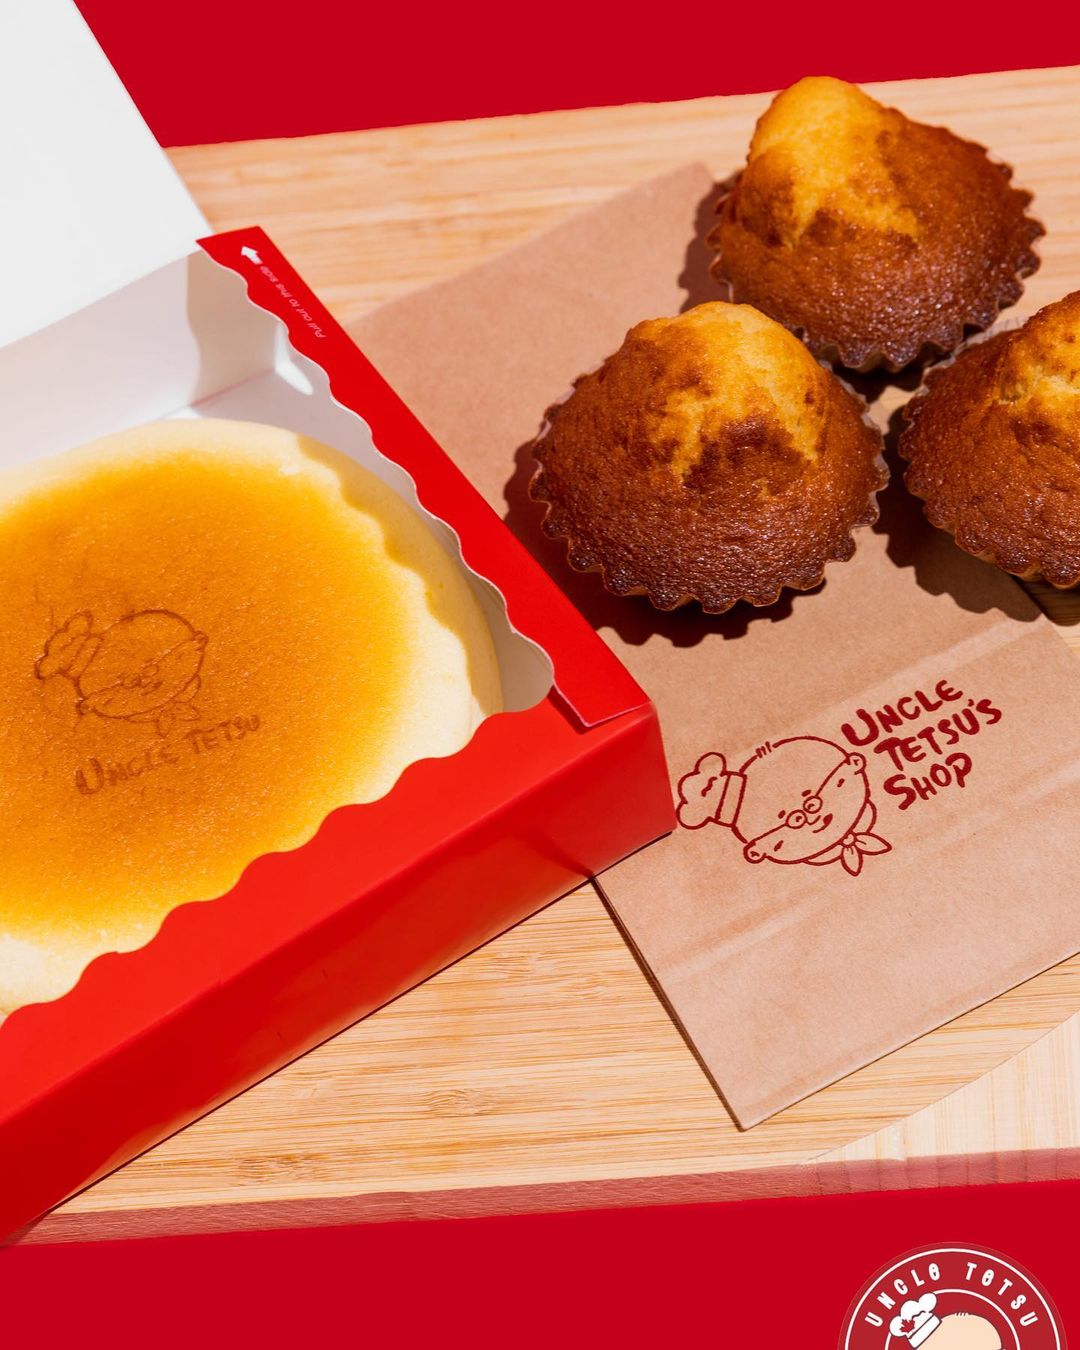 Japanese cheesecake and muffin from Uncle Tetsu